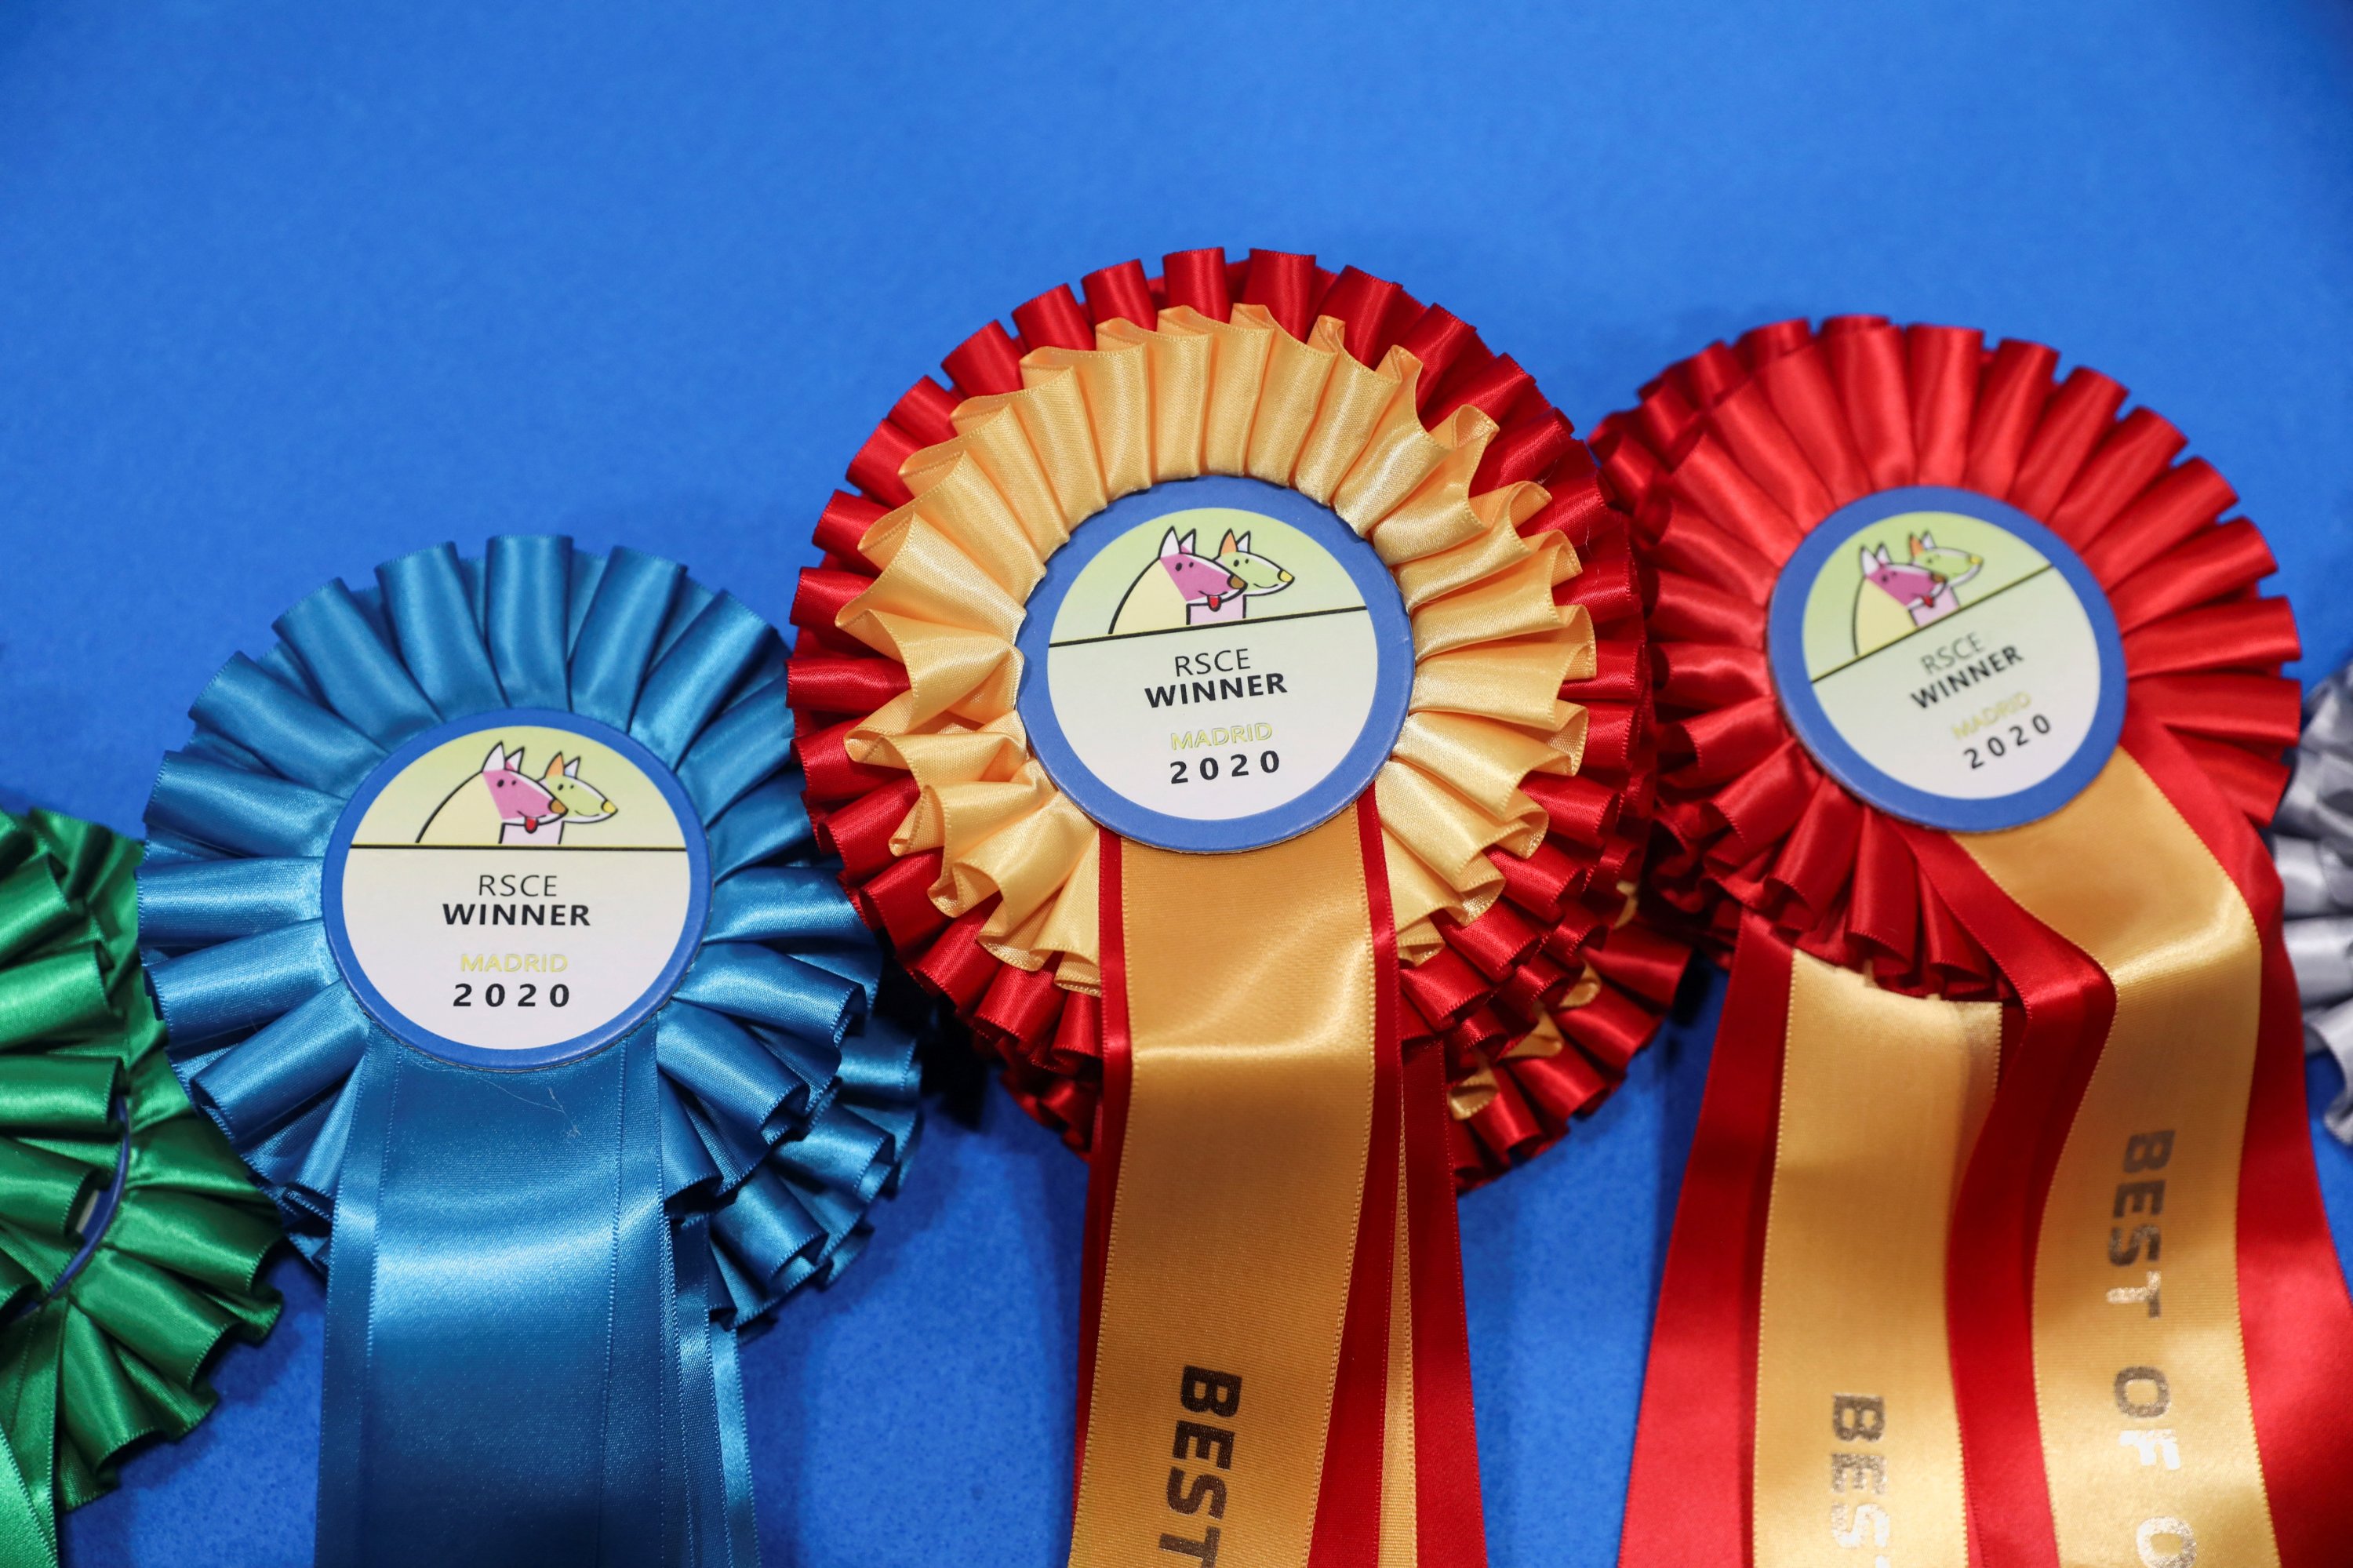 Rosettes are displayed at the World Dog Show 2022, which more than 15,000 dogs from around the world are expected to attend, at the IFEMA conference center in Madrid, Spain, June 23, 2022. (Photo Reuters)